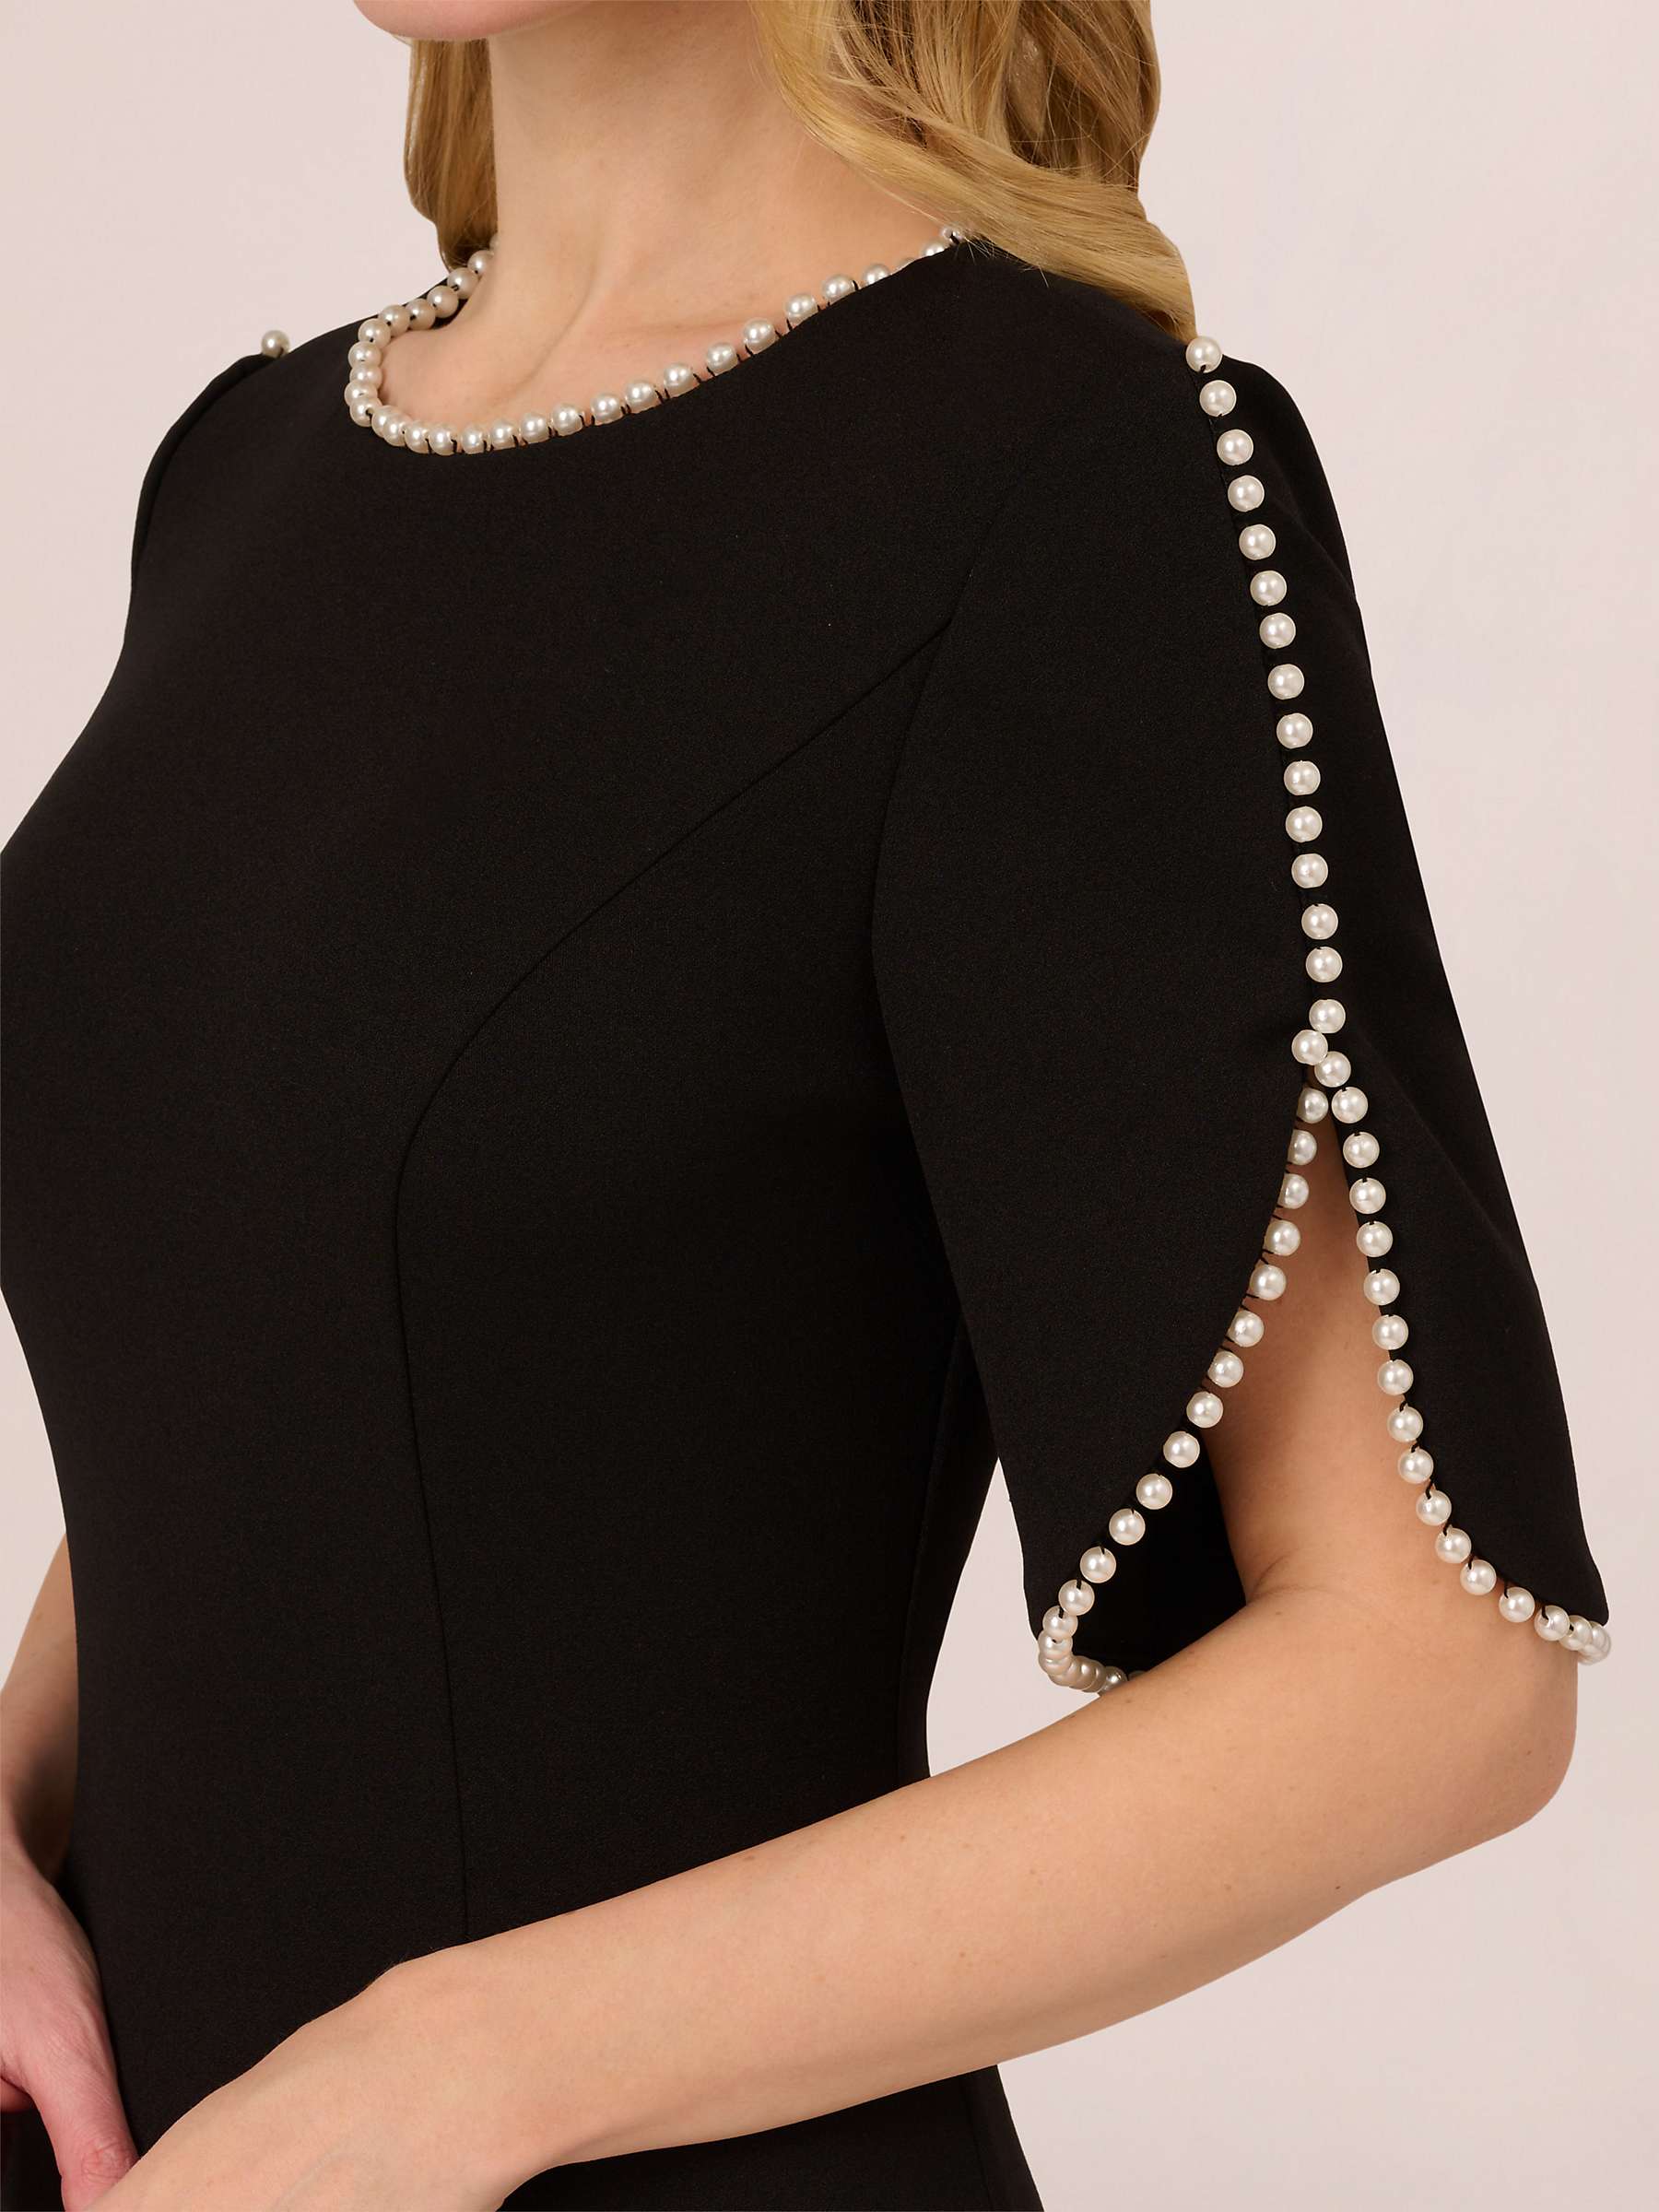 Buy Adrianna Papell Knit Crepe Pearl Dress, Black Online at johnlewis.com